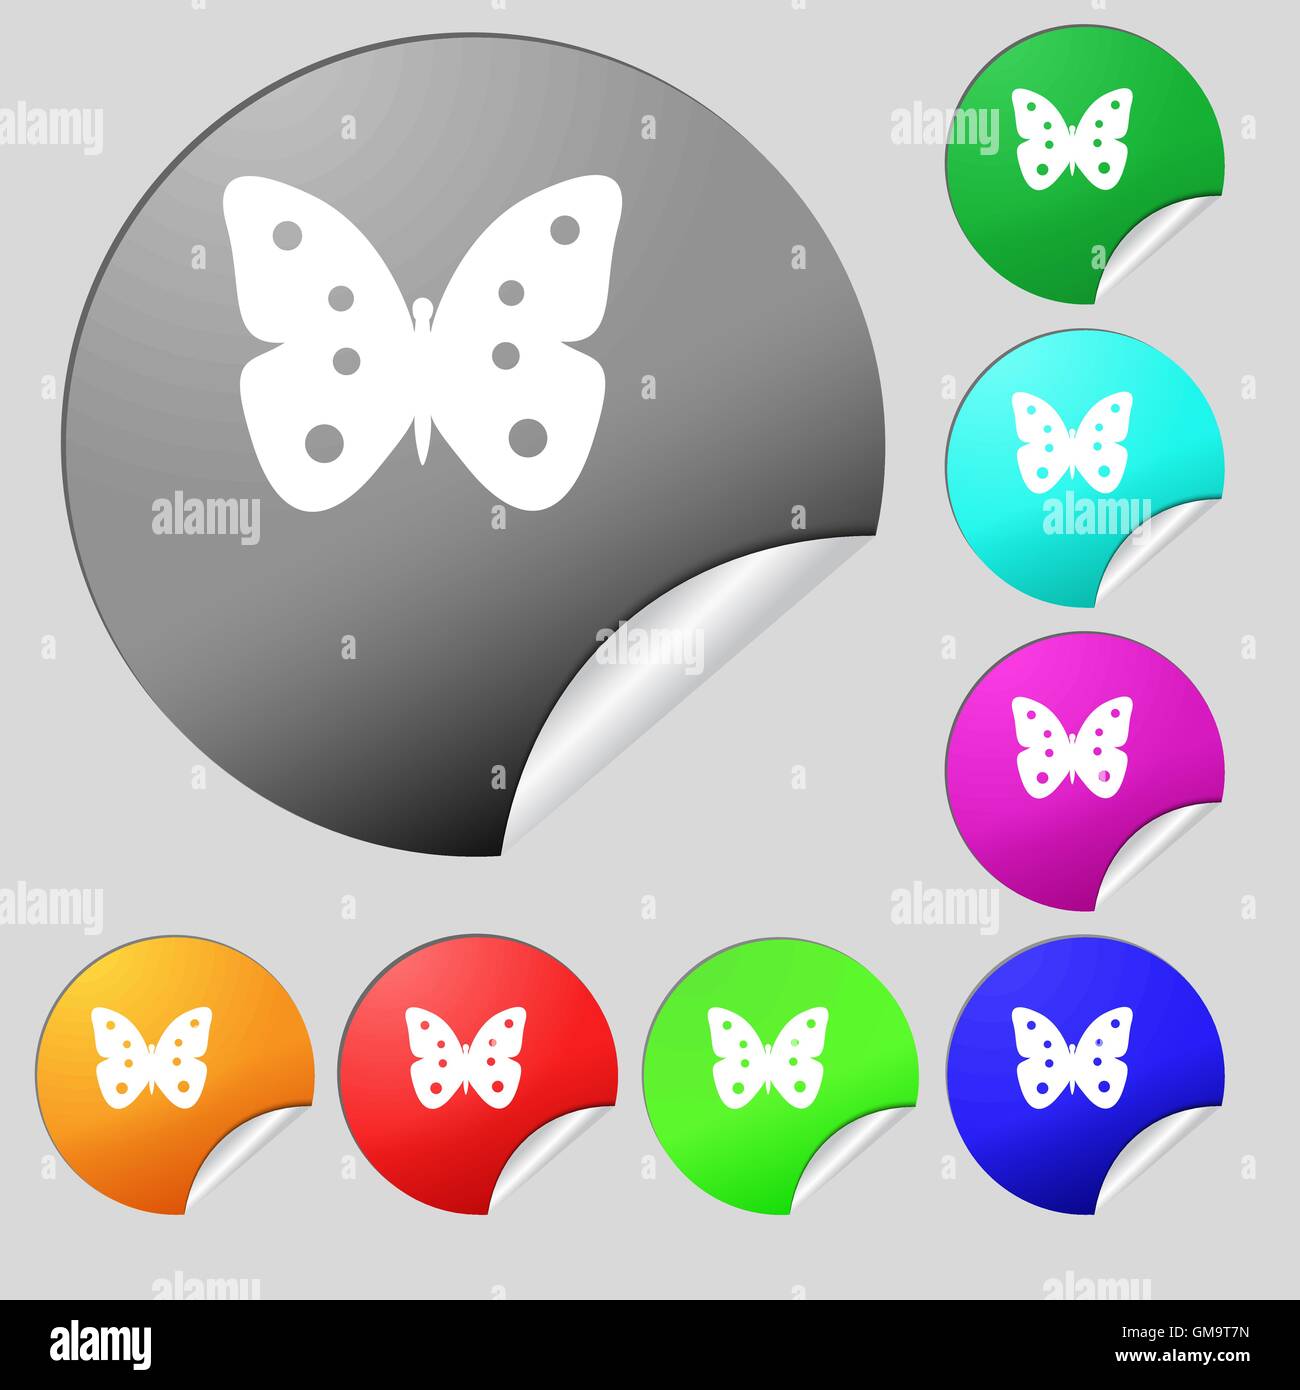 Trendy Y2K stickers. Cute girly patches, butterfly and glamour